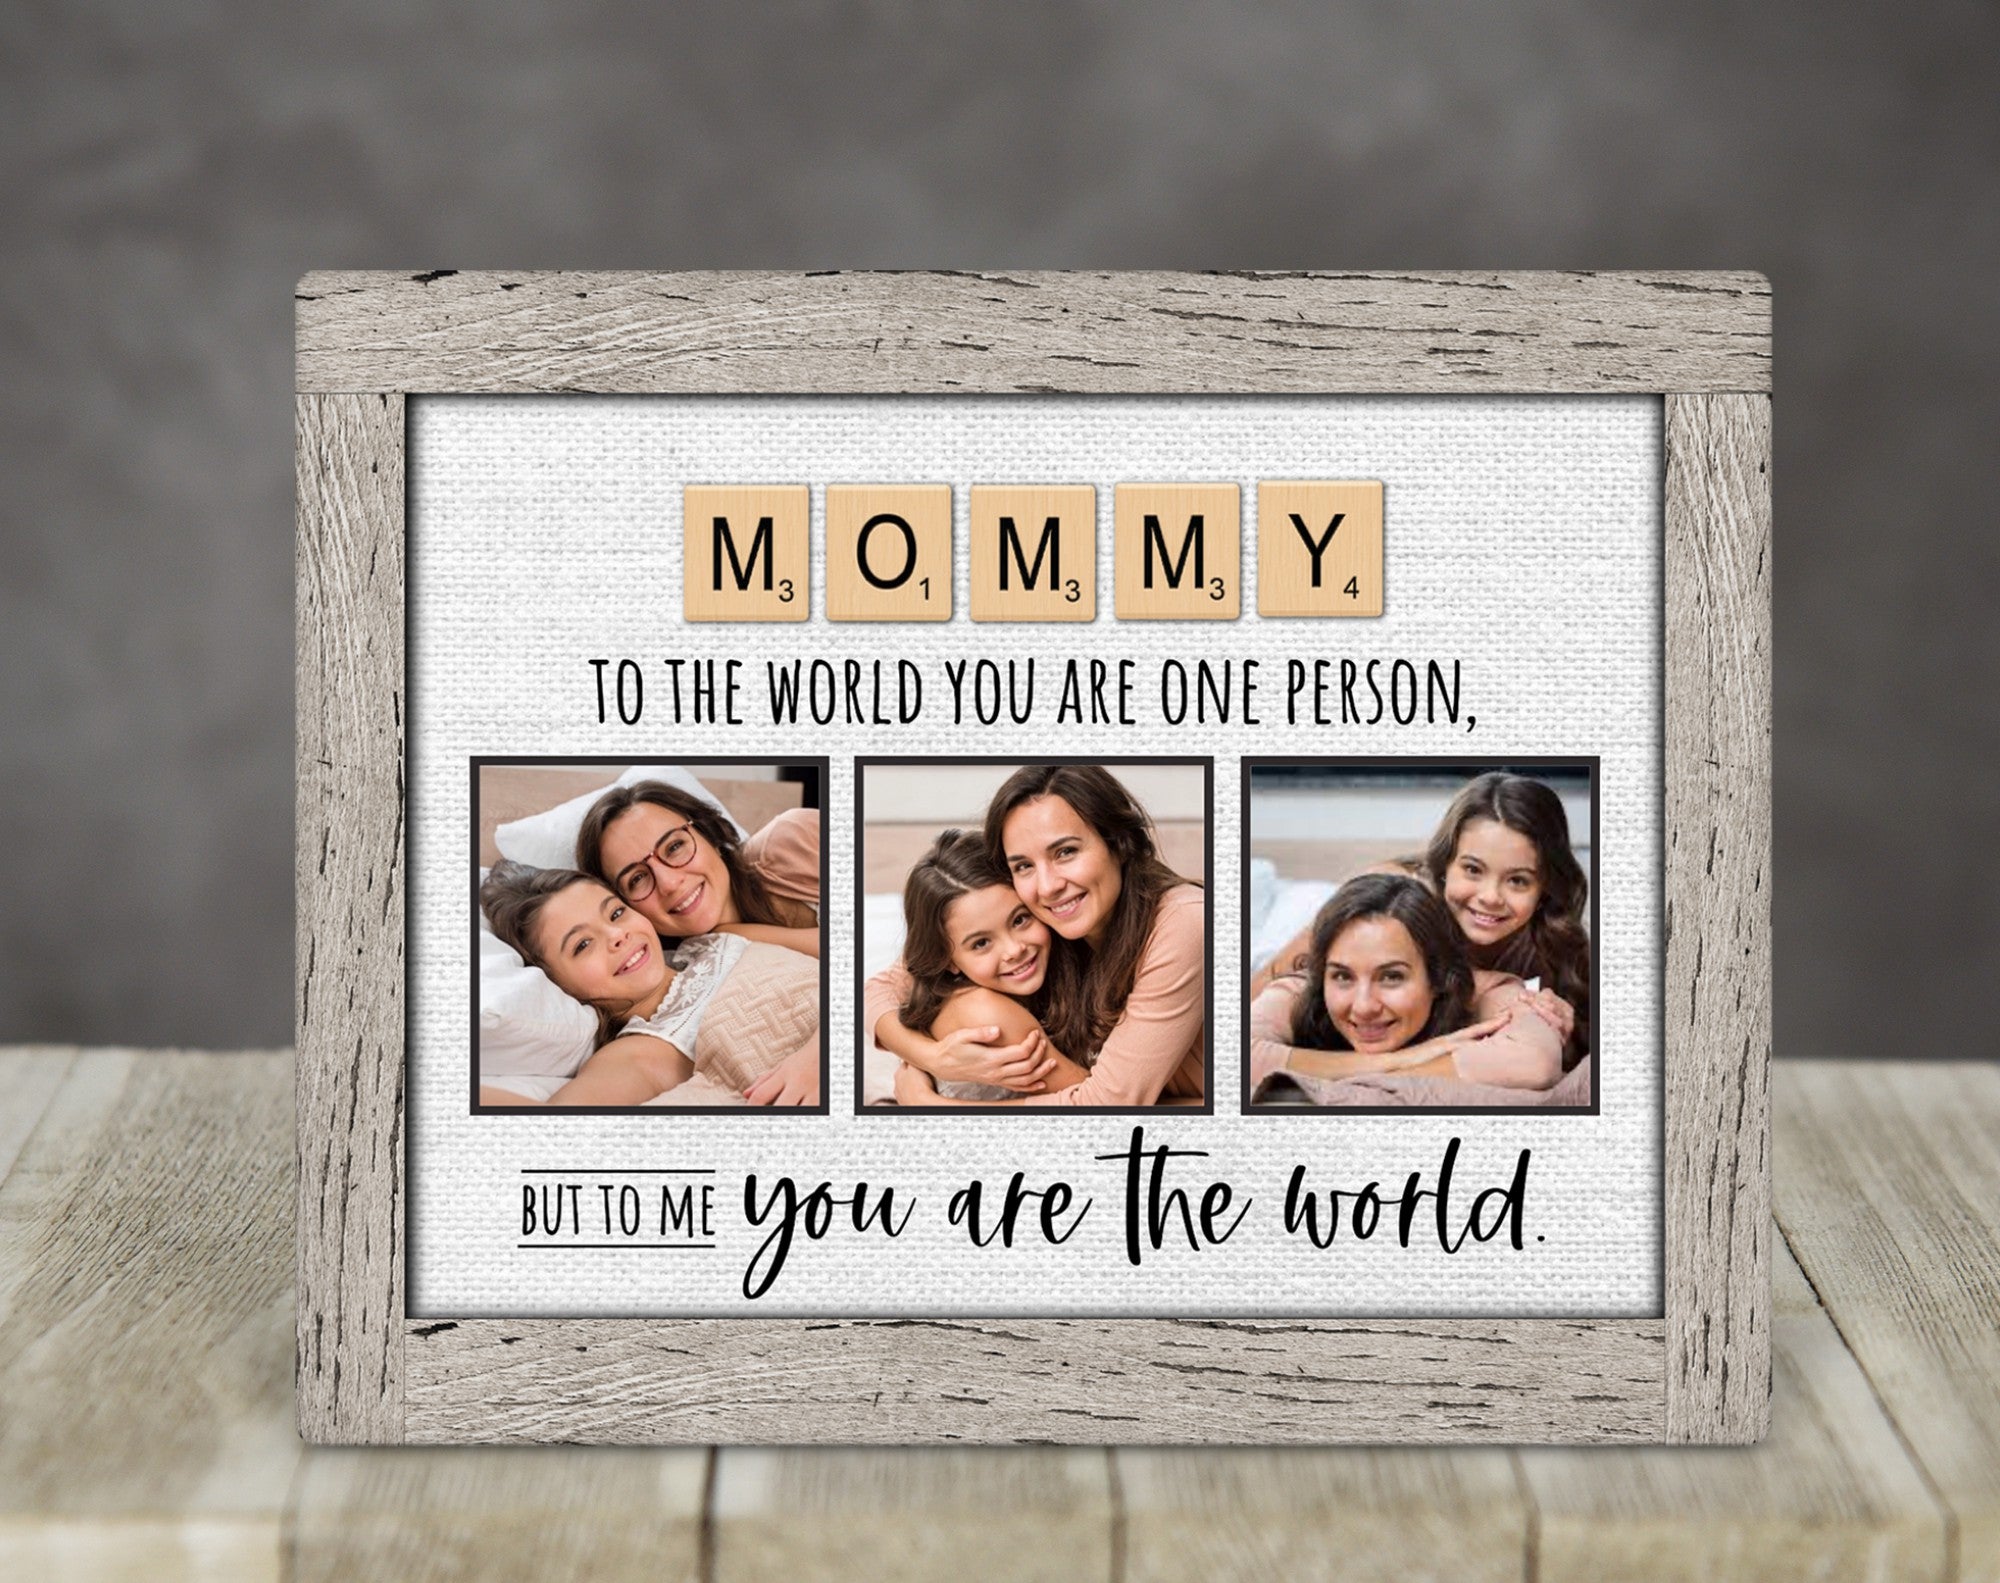 Mothers Day Gifts, Gifts for Mom, Birthday Gifts for Mom from